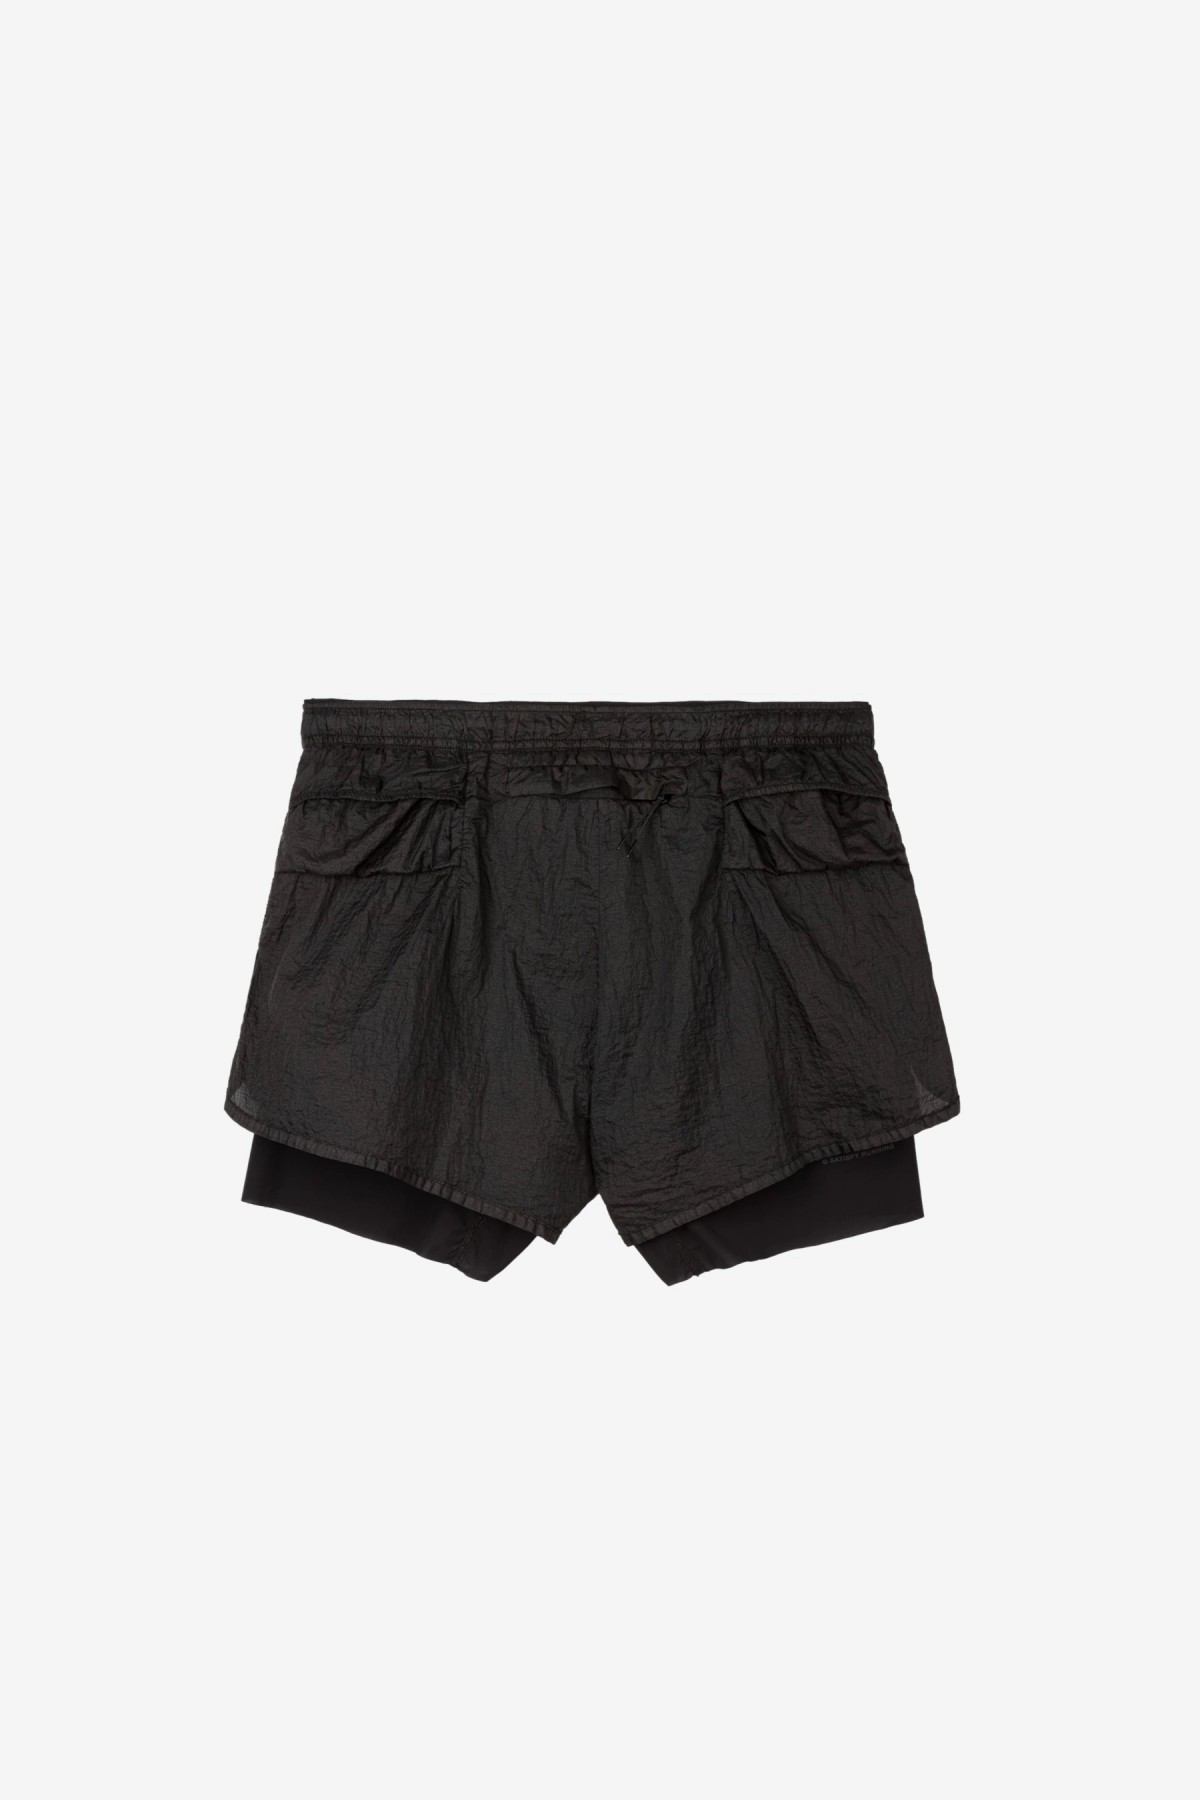 Satisfy Running Rippy 3 Trail Shorts in Aged Black